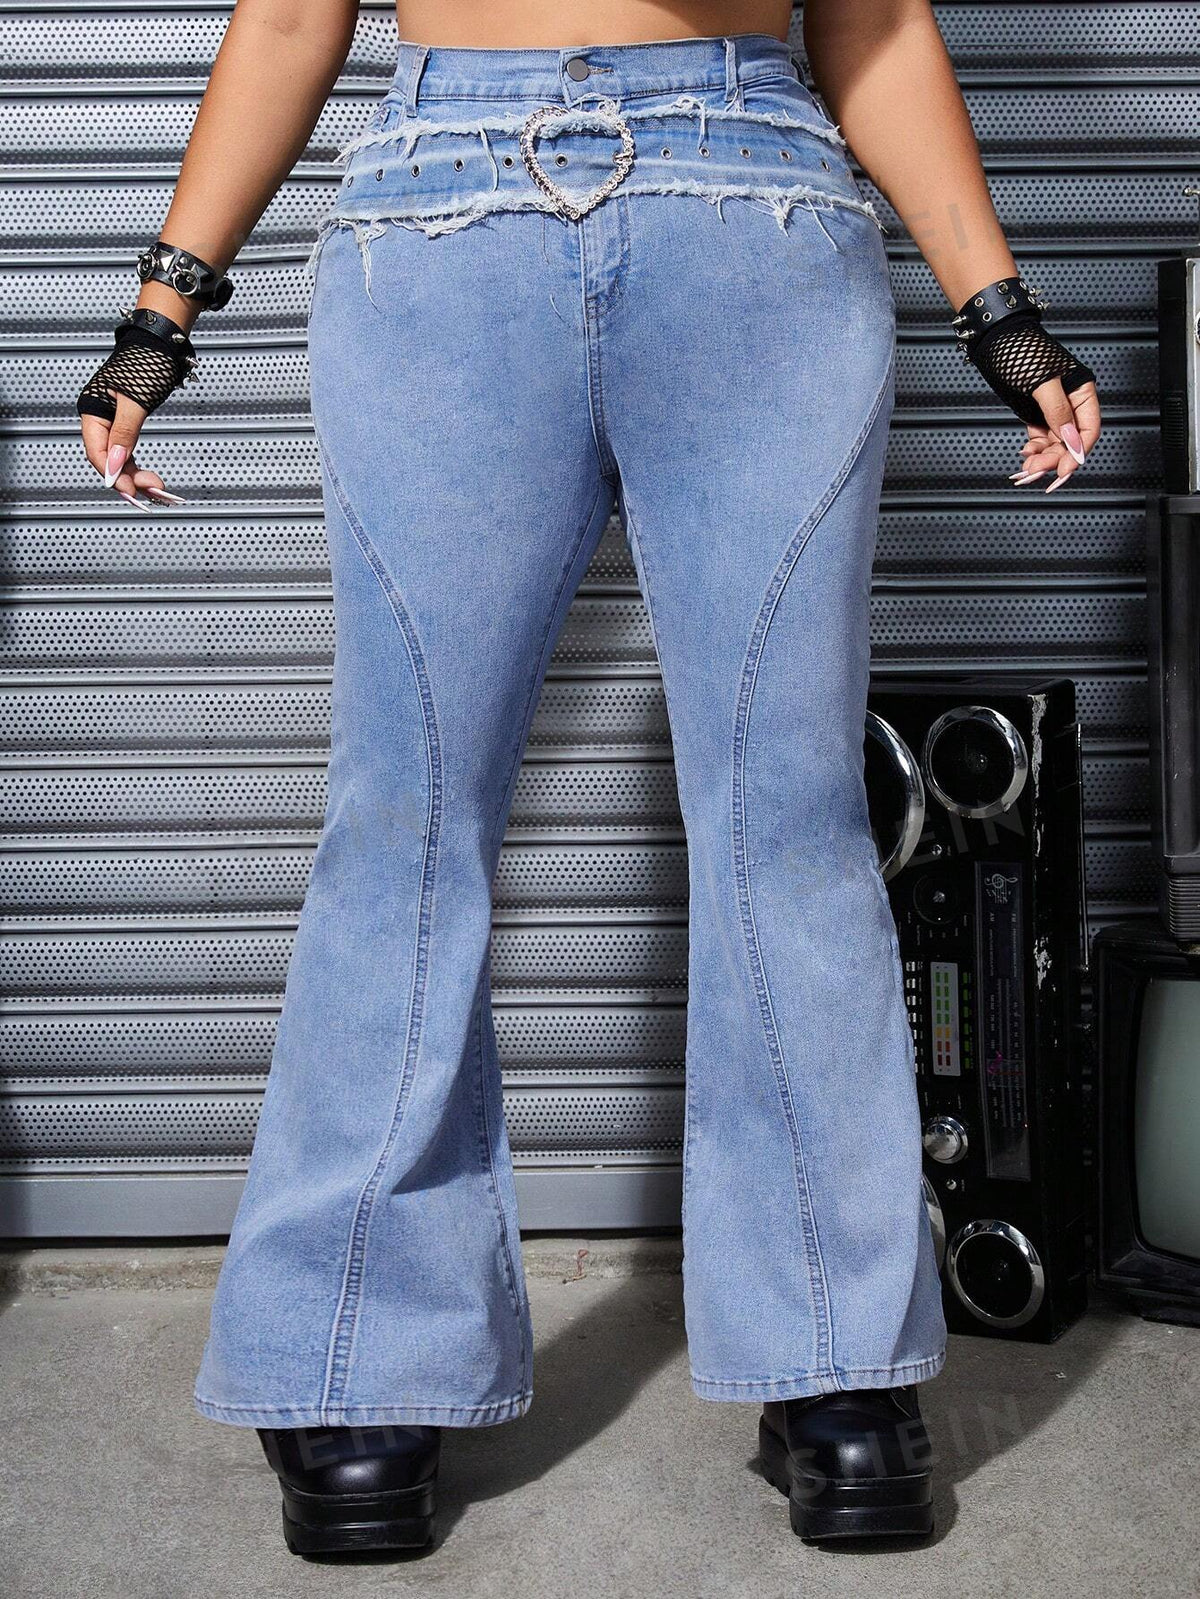 ROMWE Grunge Punk Women's Plus Size Flared Casual Jeans With Waist Corn And Buckle Design